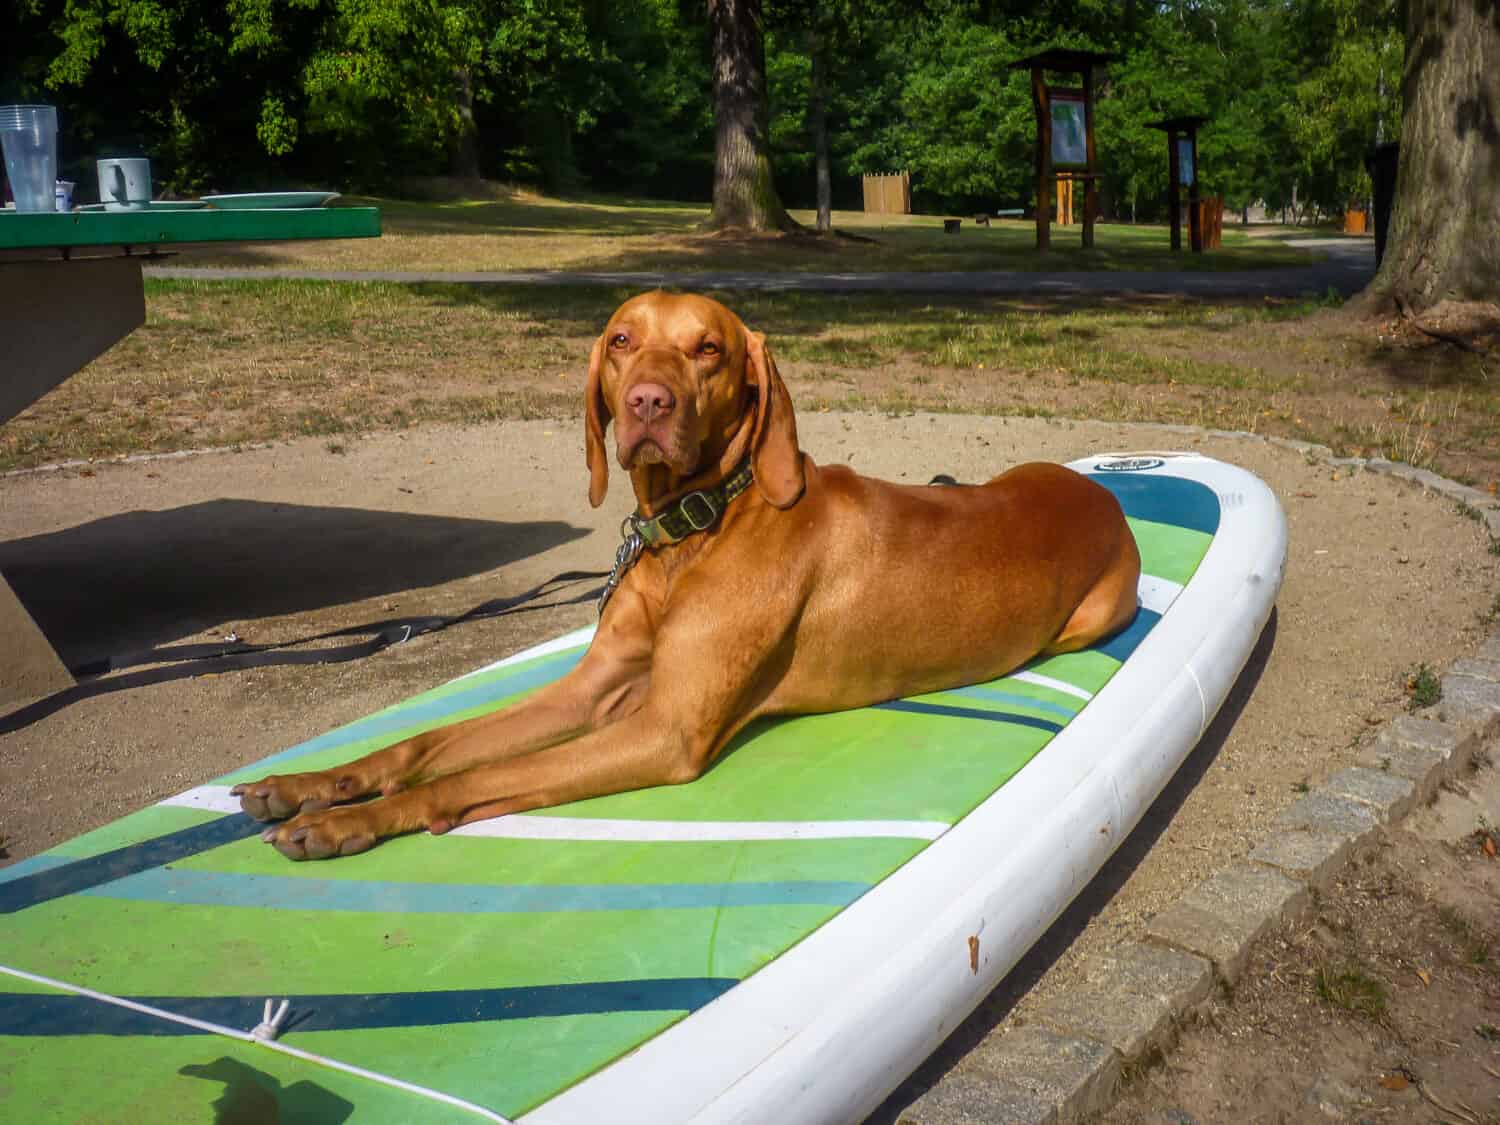 Brown dog lying on green paddleboard on the ground in the forest